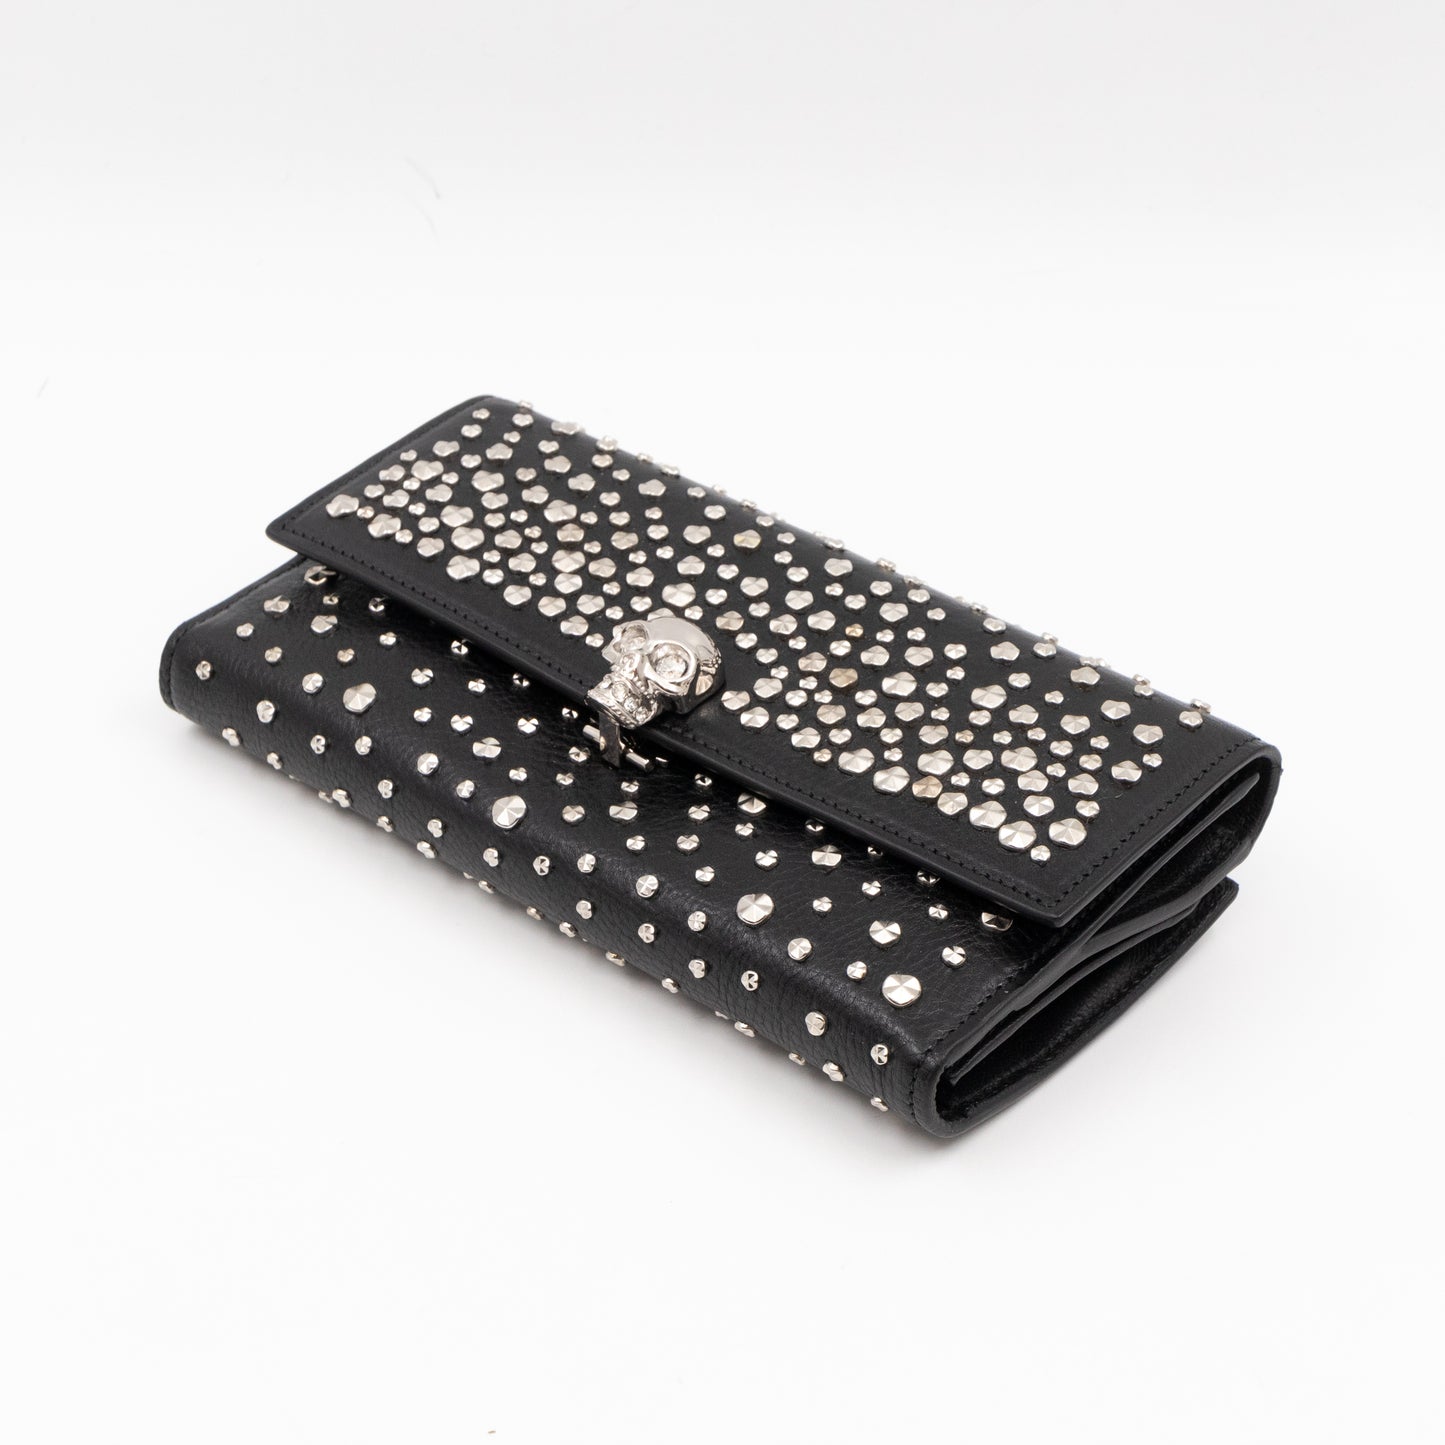 Studded Skull Continental Wallet Black Leather